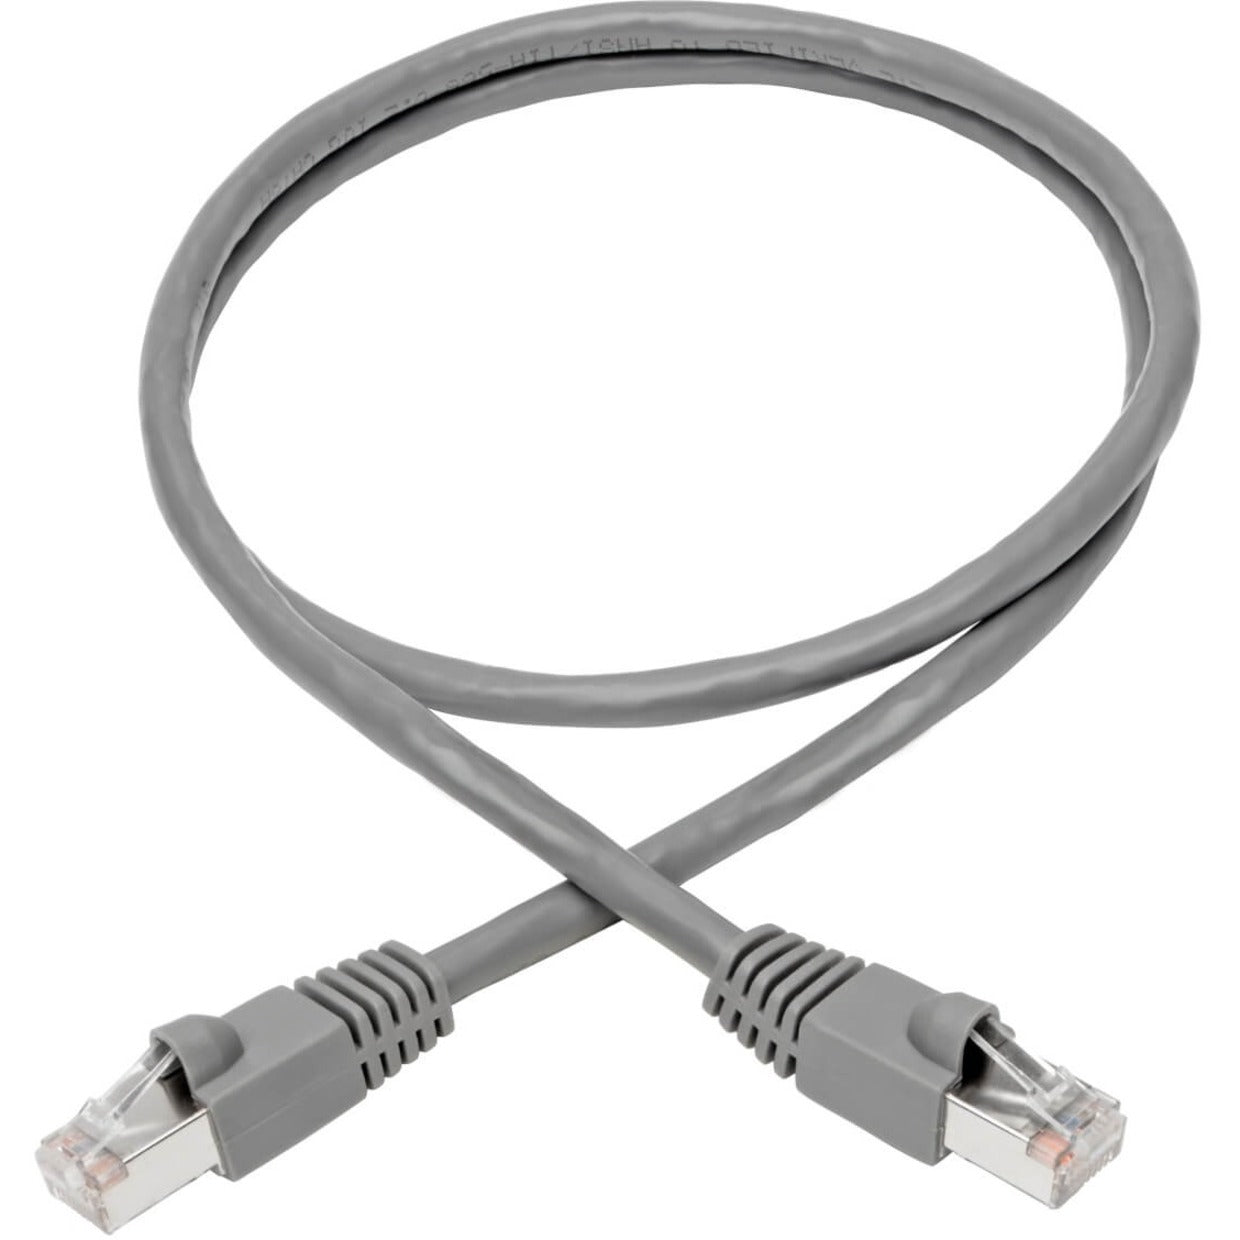 Tripp Lite N262-002-GY Cat.6a STP Patch Network Cable, 2ft, 10G-Certified, Gray